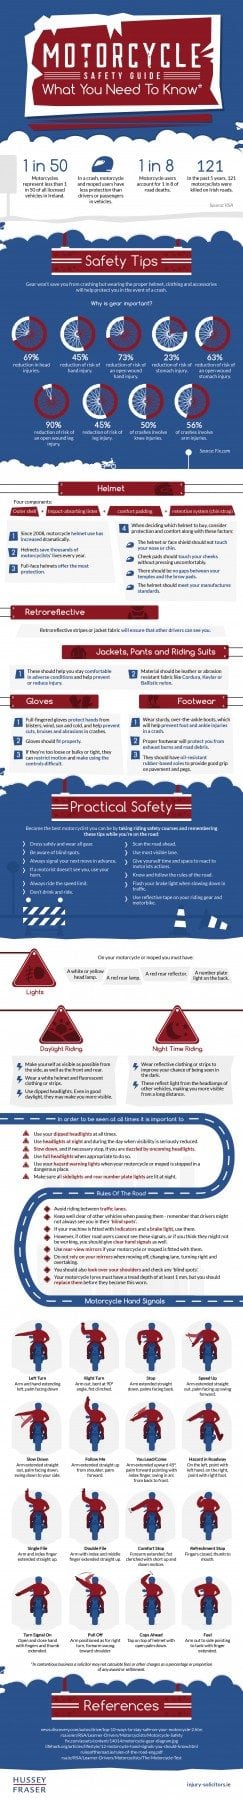 Motorcycle-Safety-Guide [3]